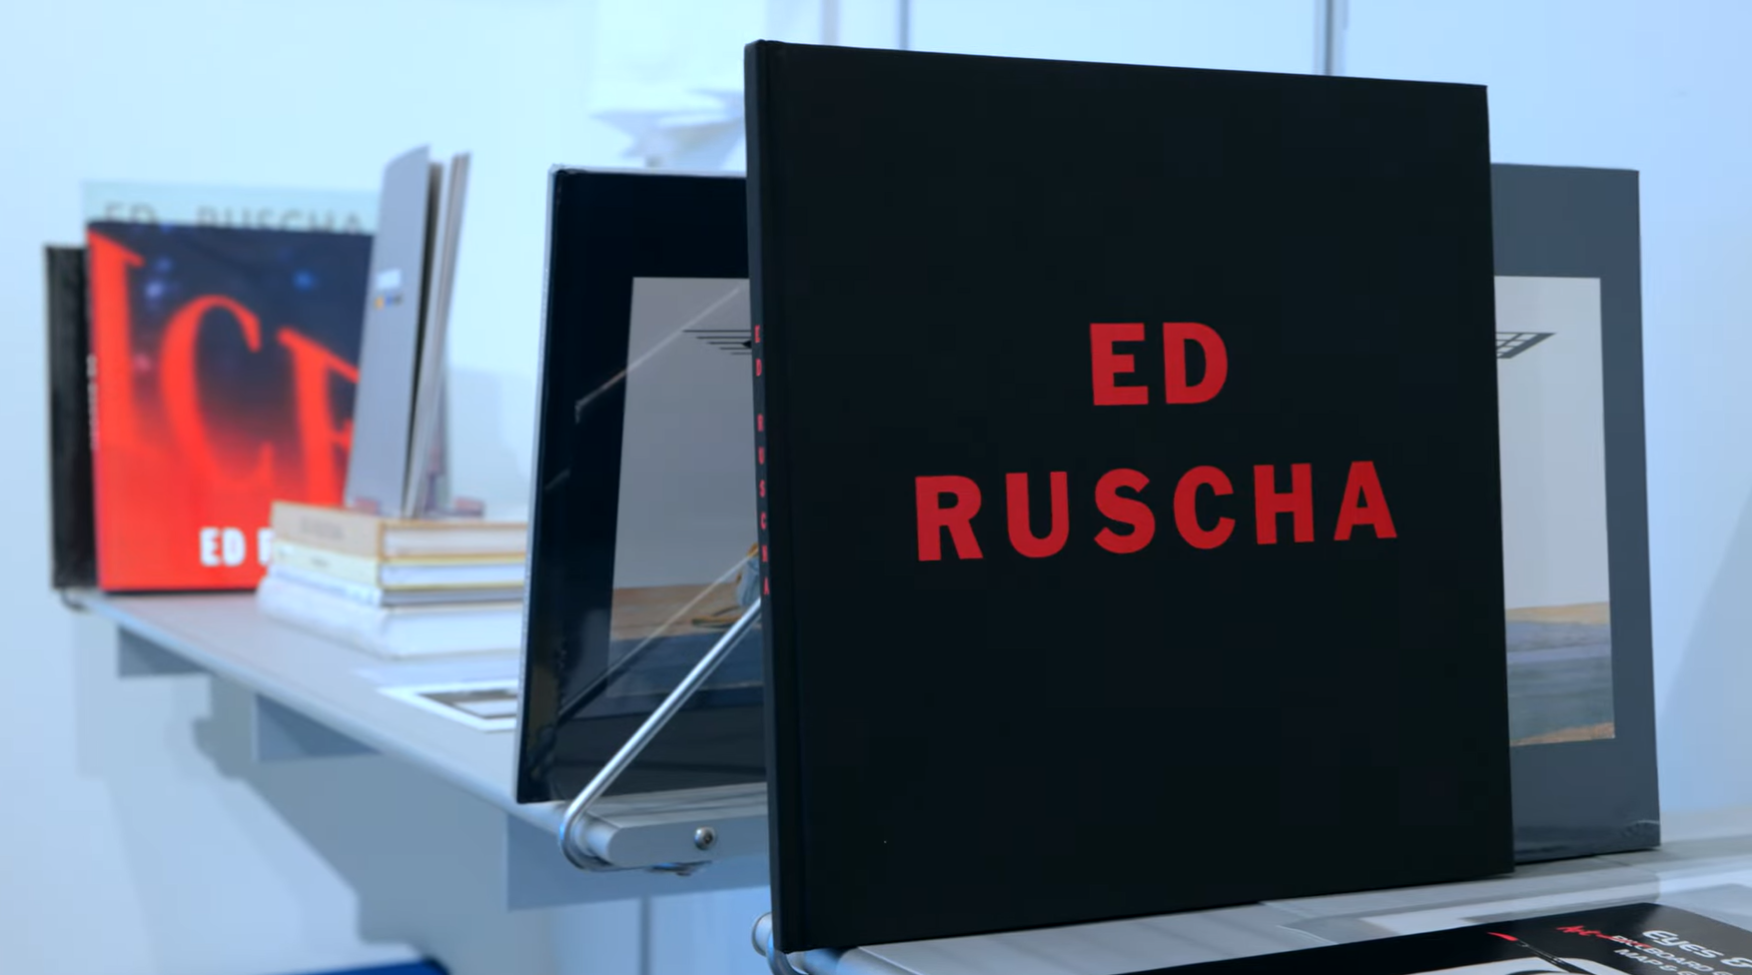 A black book with the words "ED RUSCHA" in red on the cover sits on a shelf with other art books